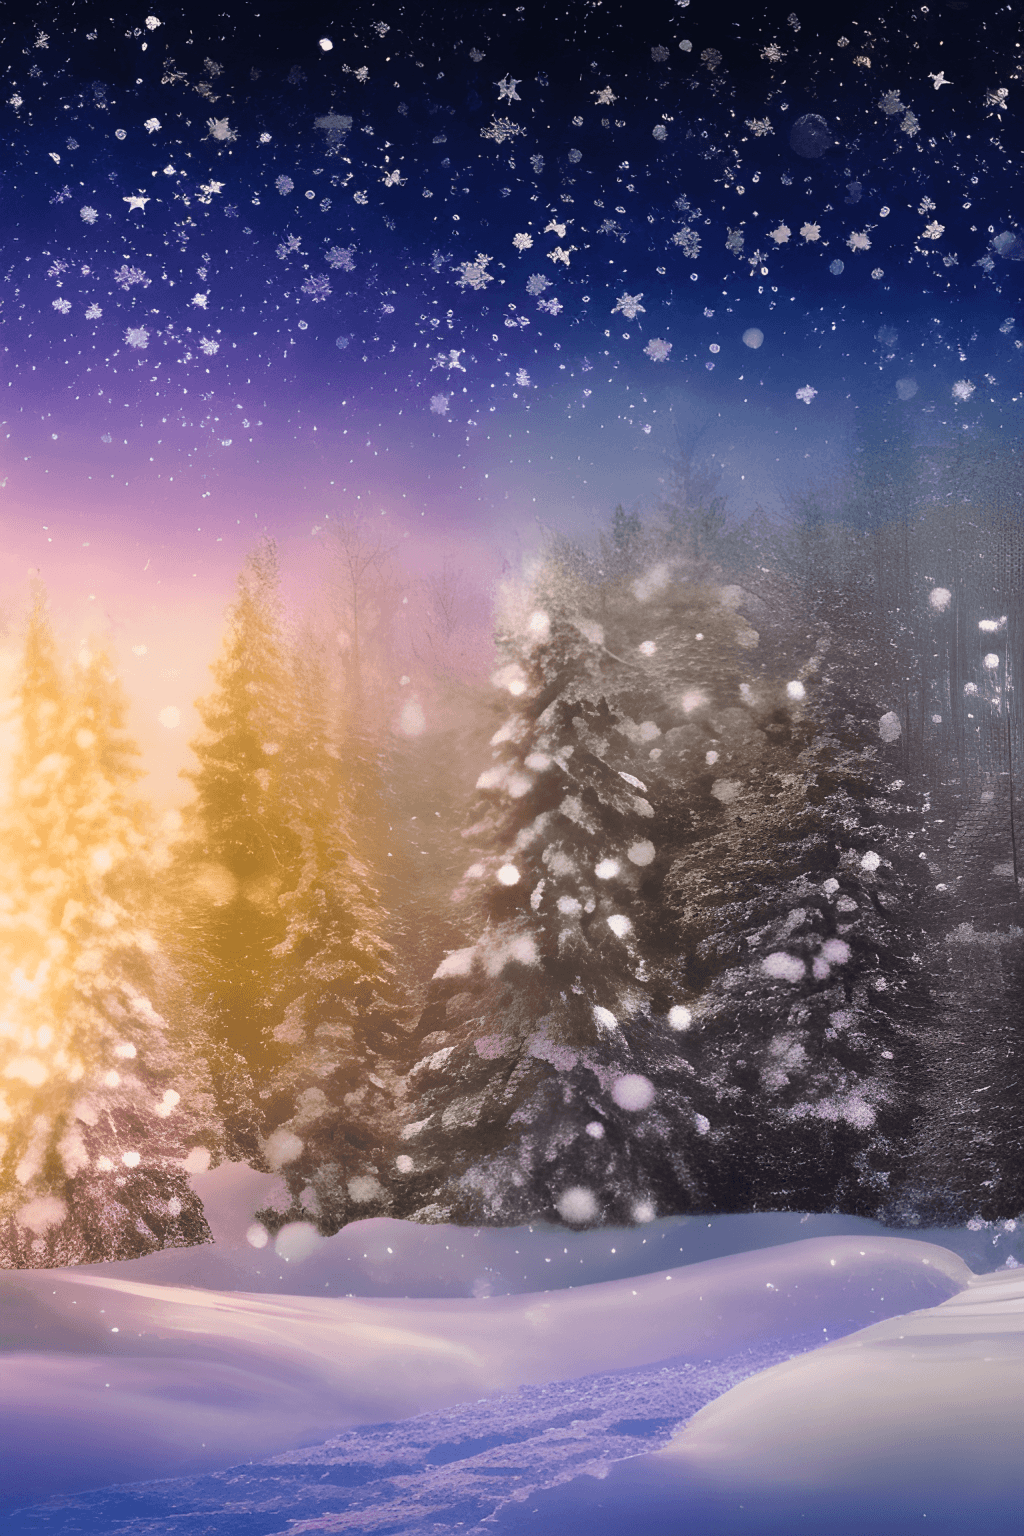 Winter Landscape with Fantasy Glow and Stars · Creative Fabrica